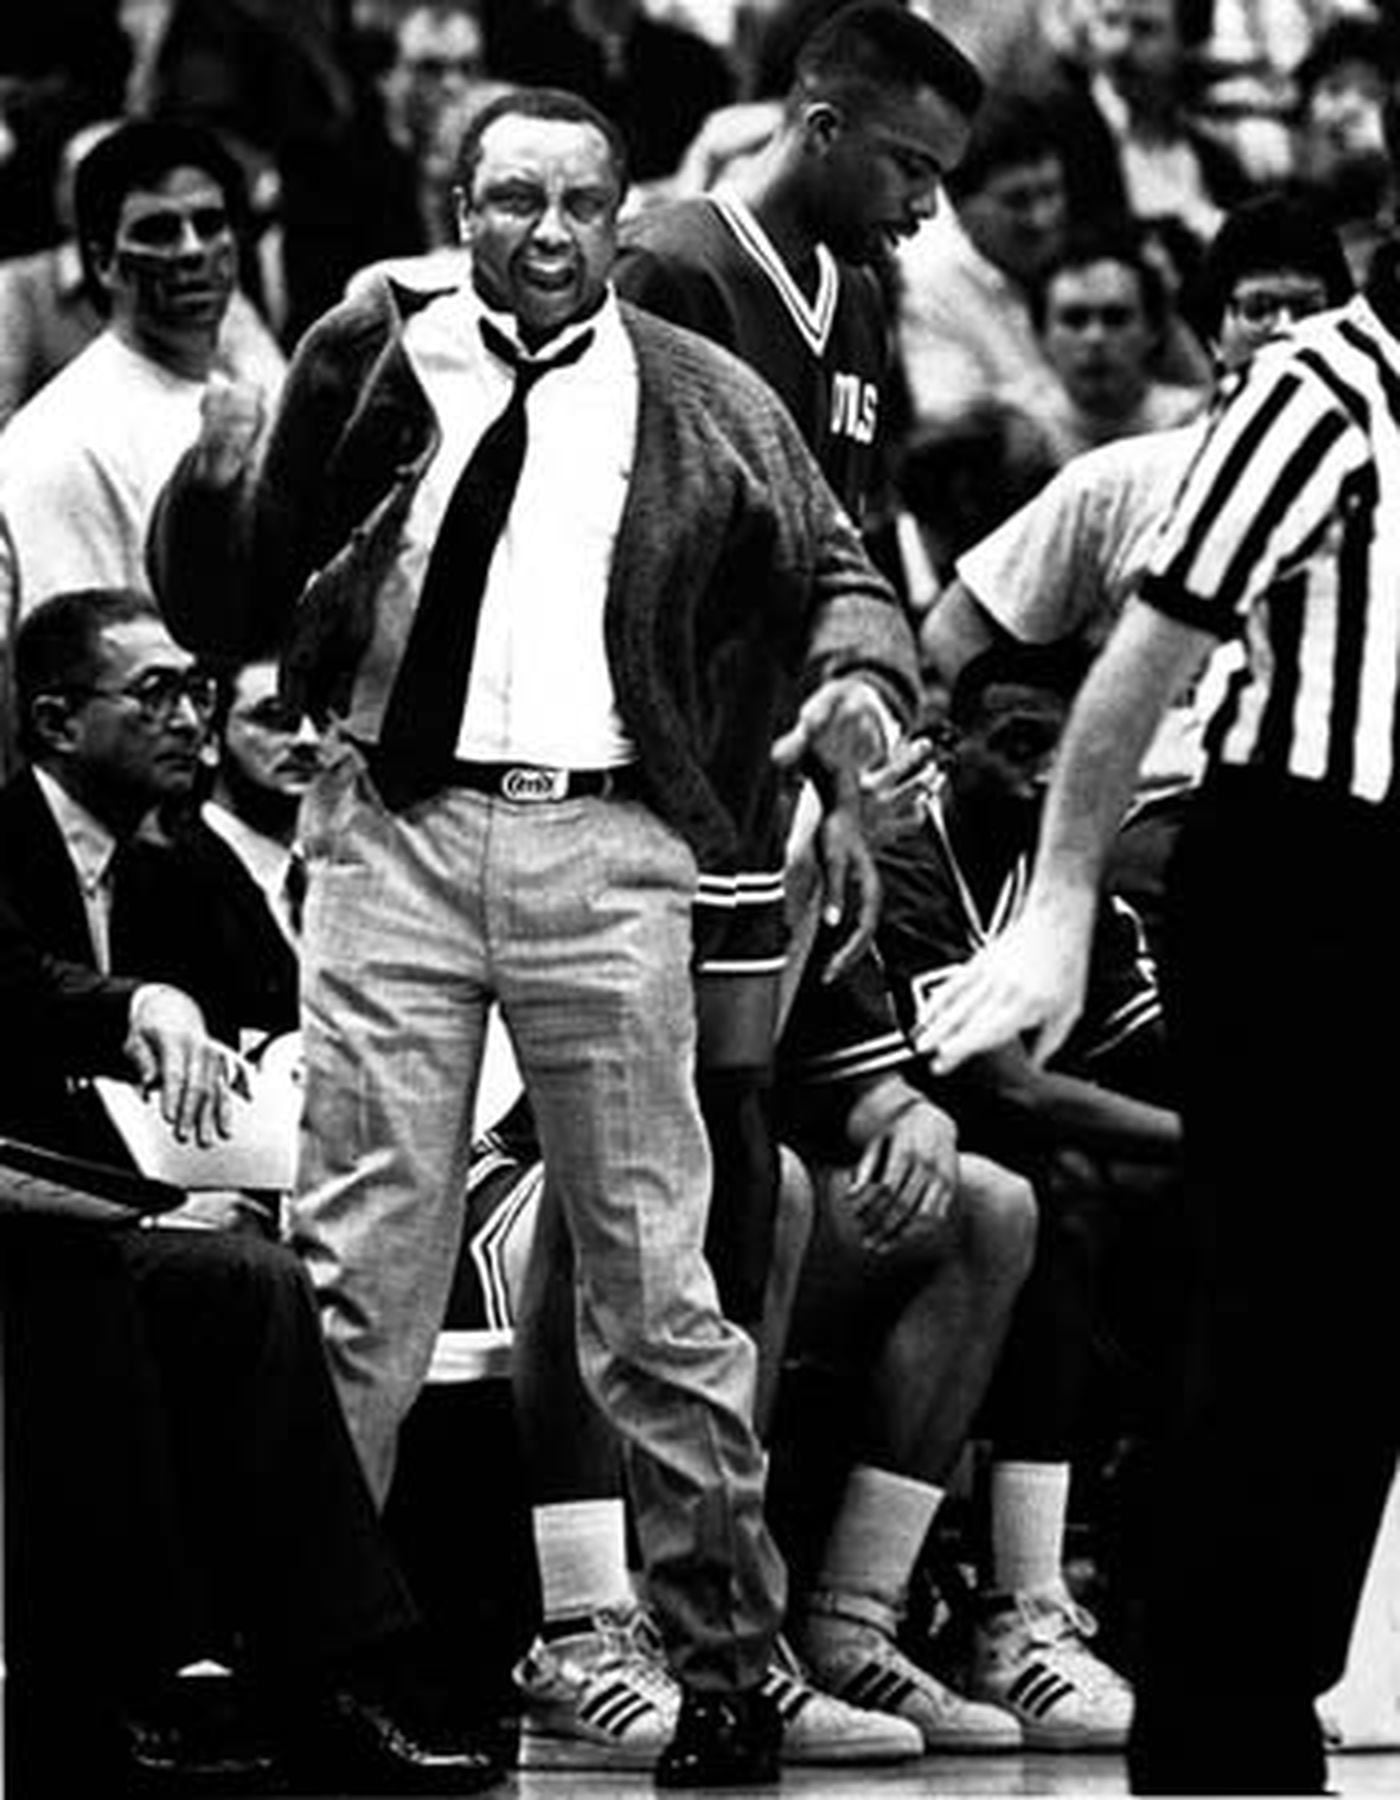 Temple Owls coach John Chaney on the sidelines of a game against North Carolina in 1988.